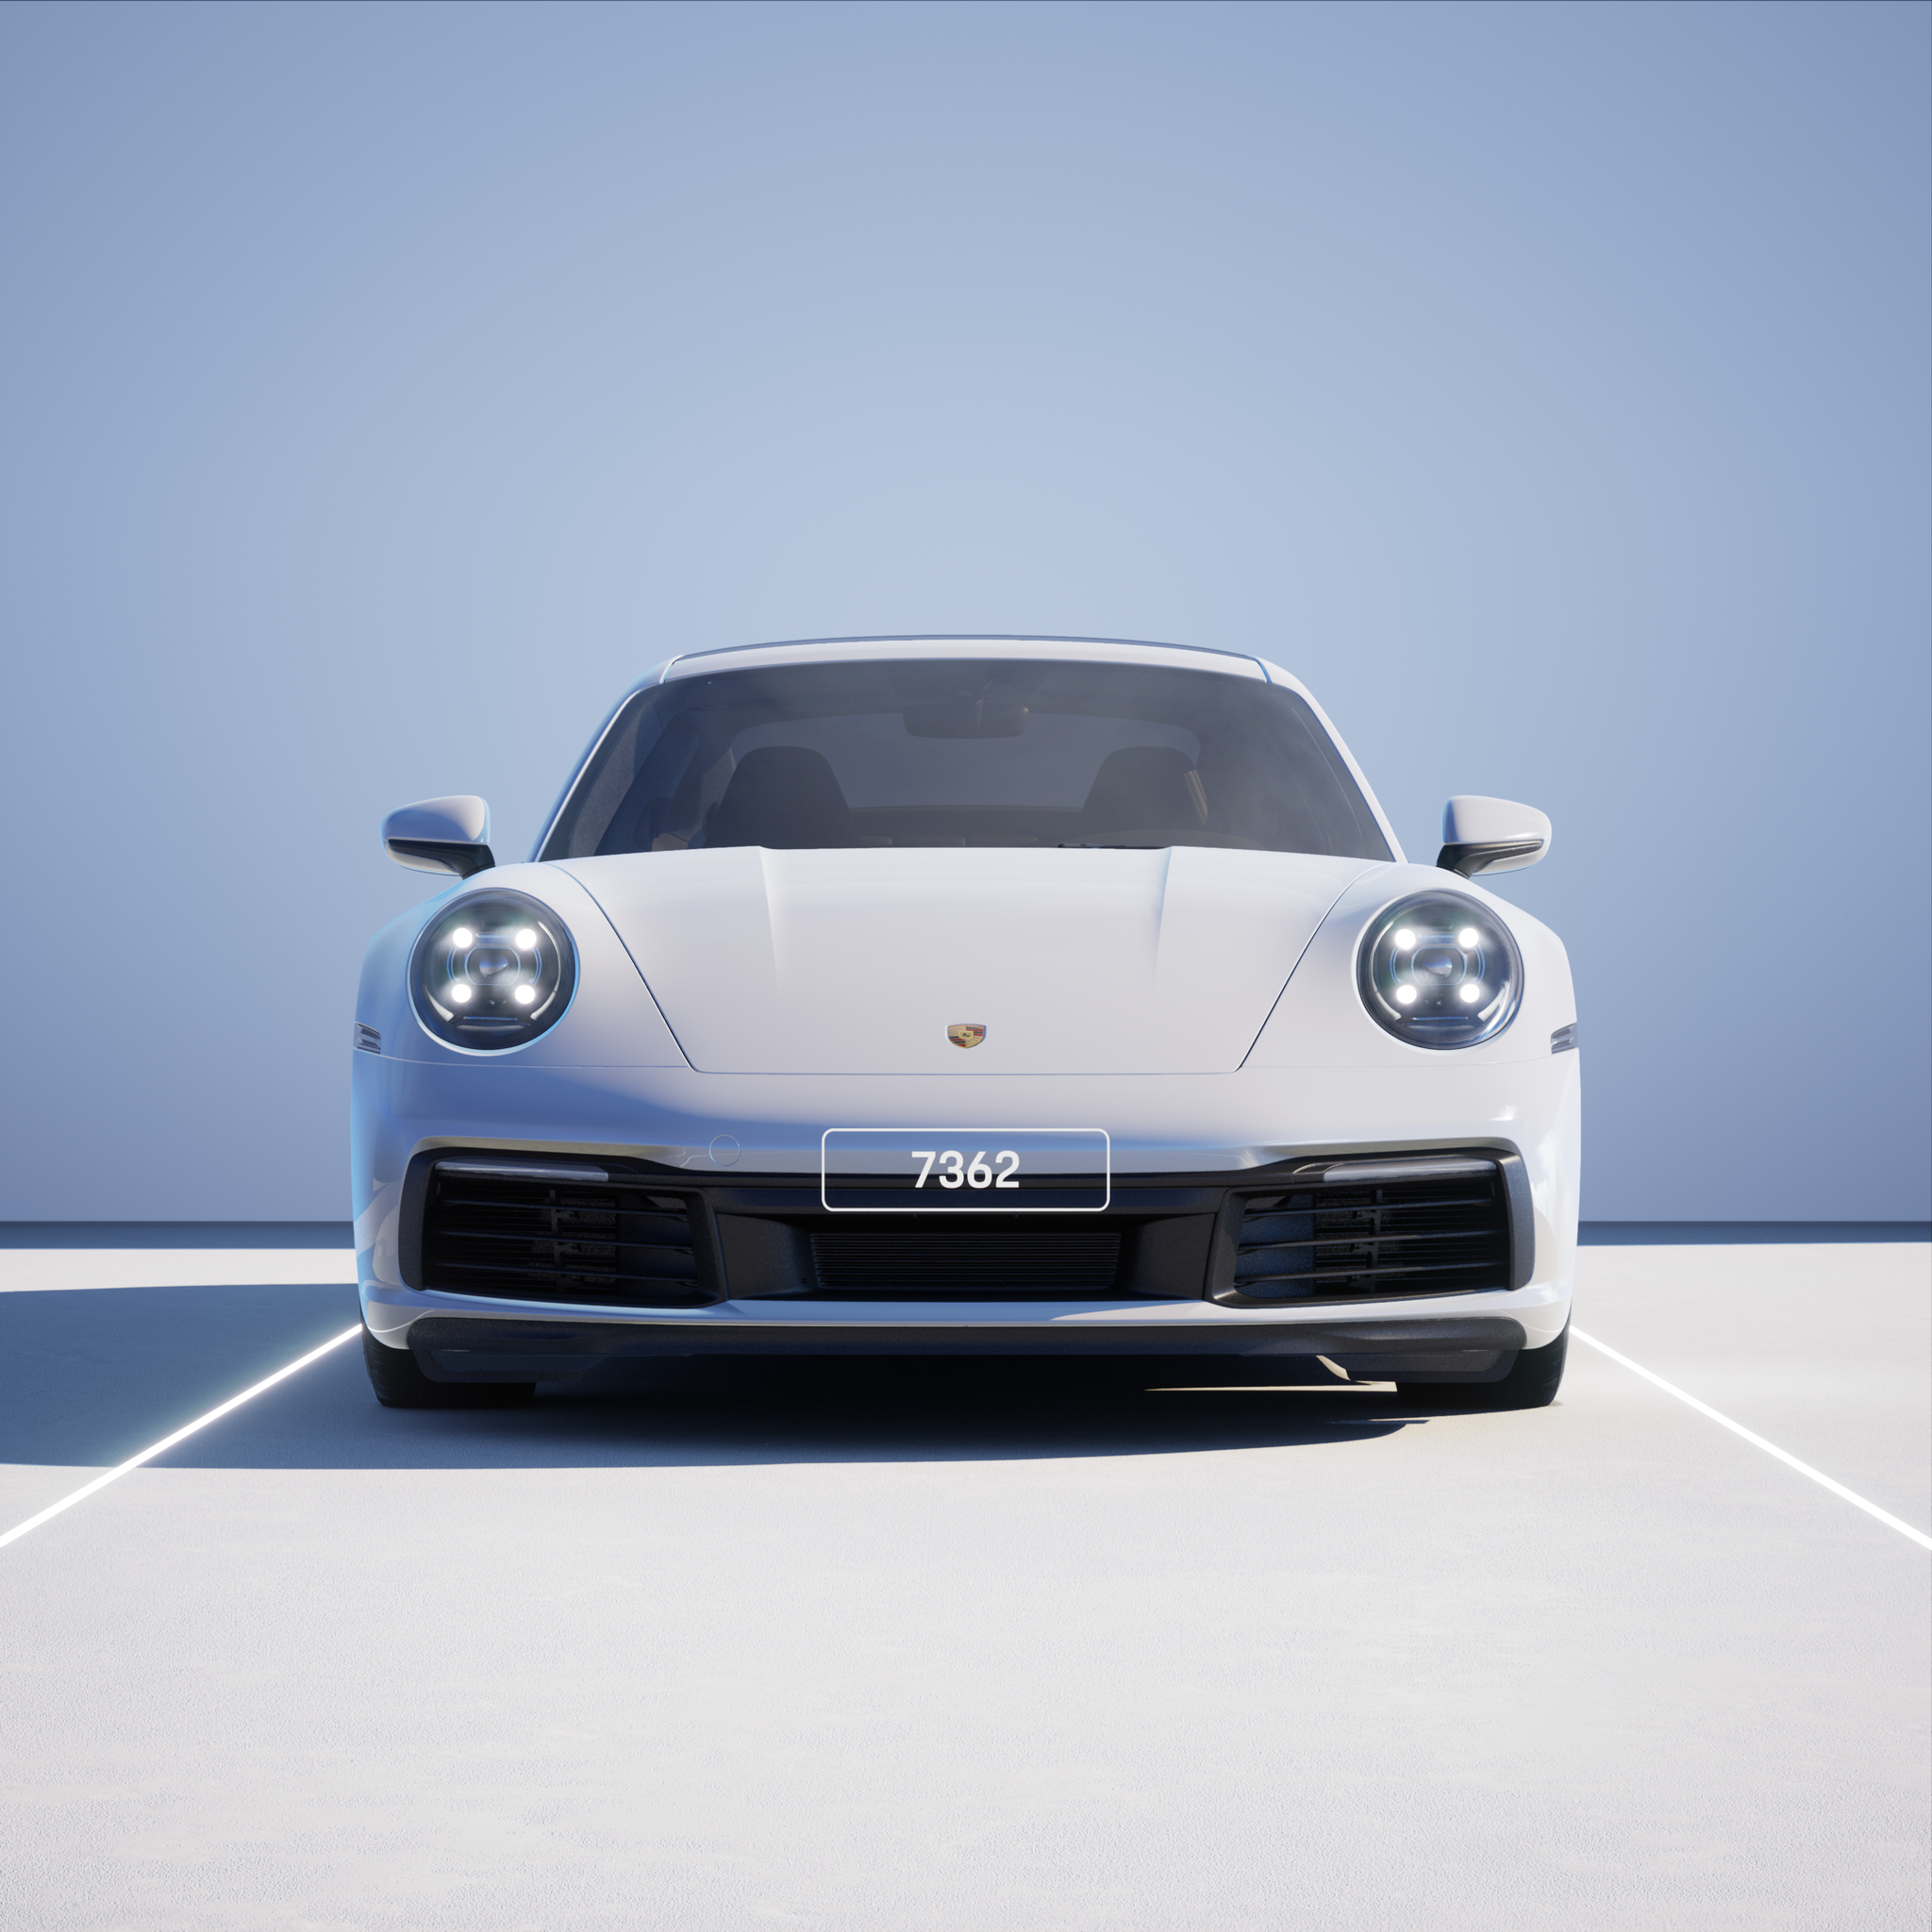 The PORSCHΞ 911 7362 image in phase